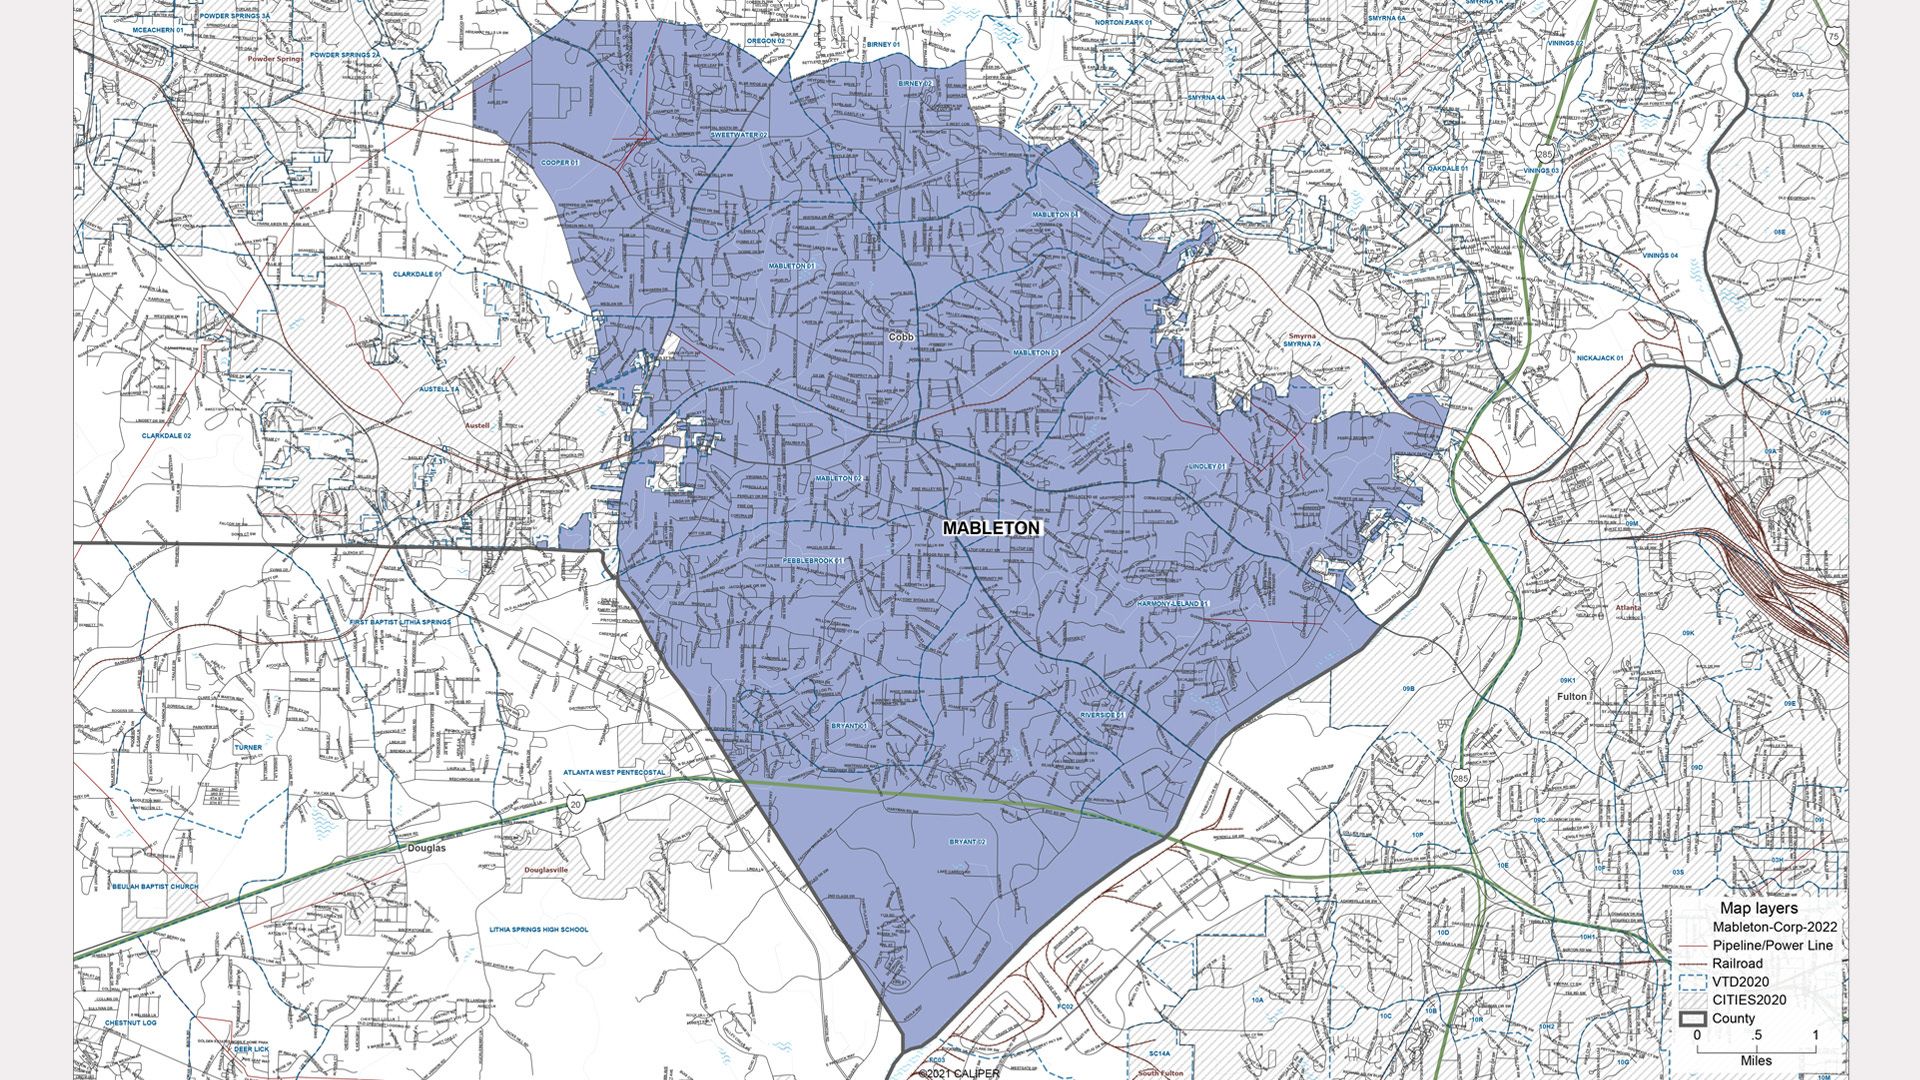 Boundaries for proposed city of Mableton